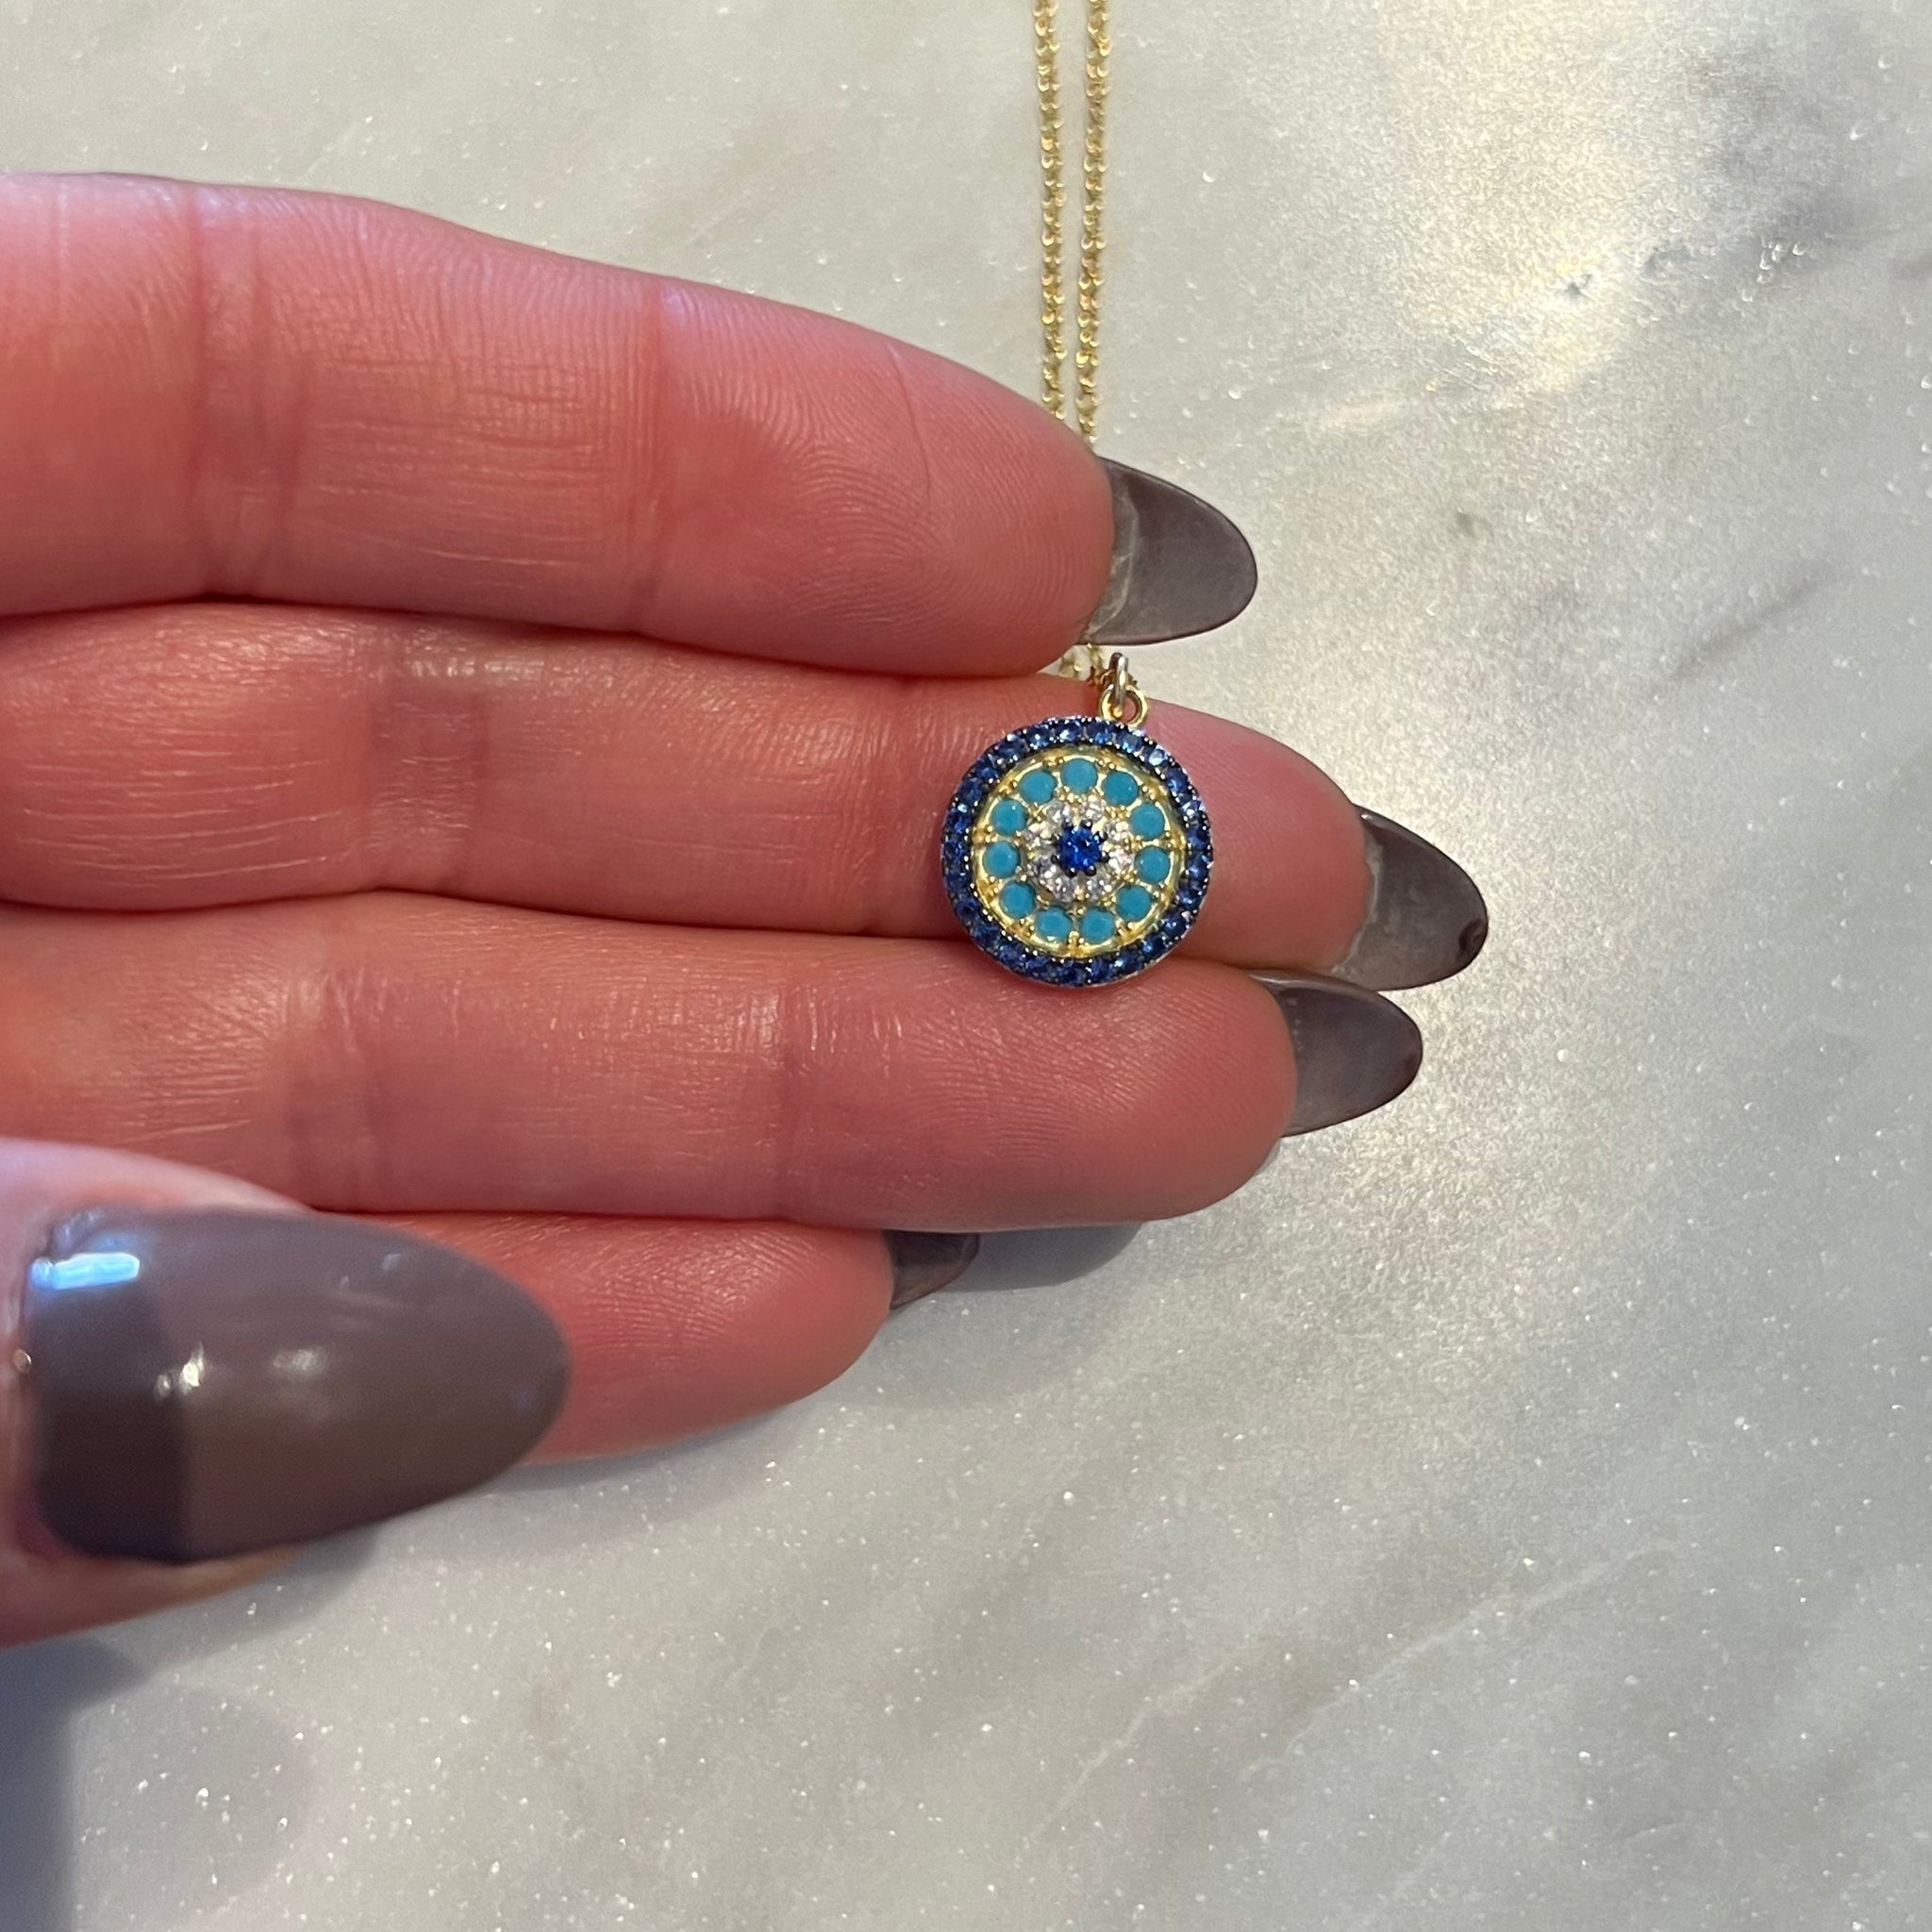 Round Turquoise and Blue Cubic Zirconia Evil Eye Necklace